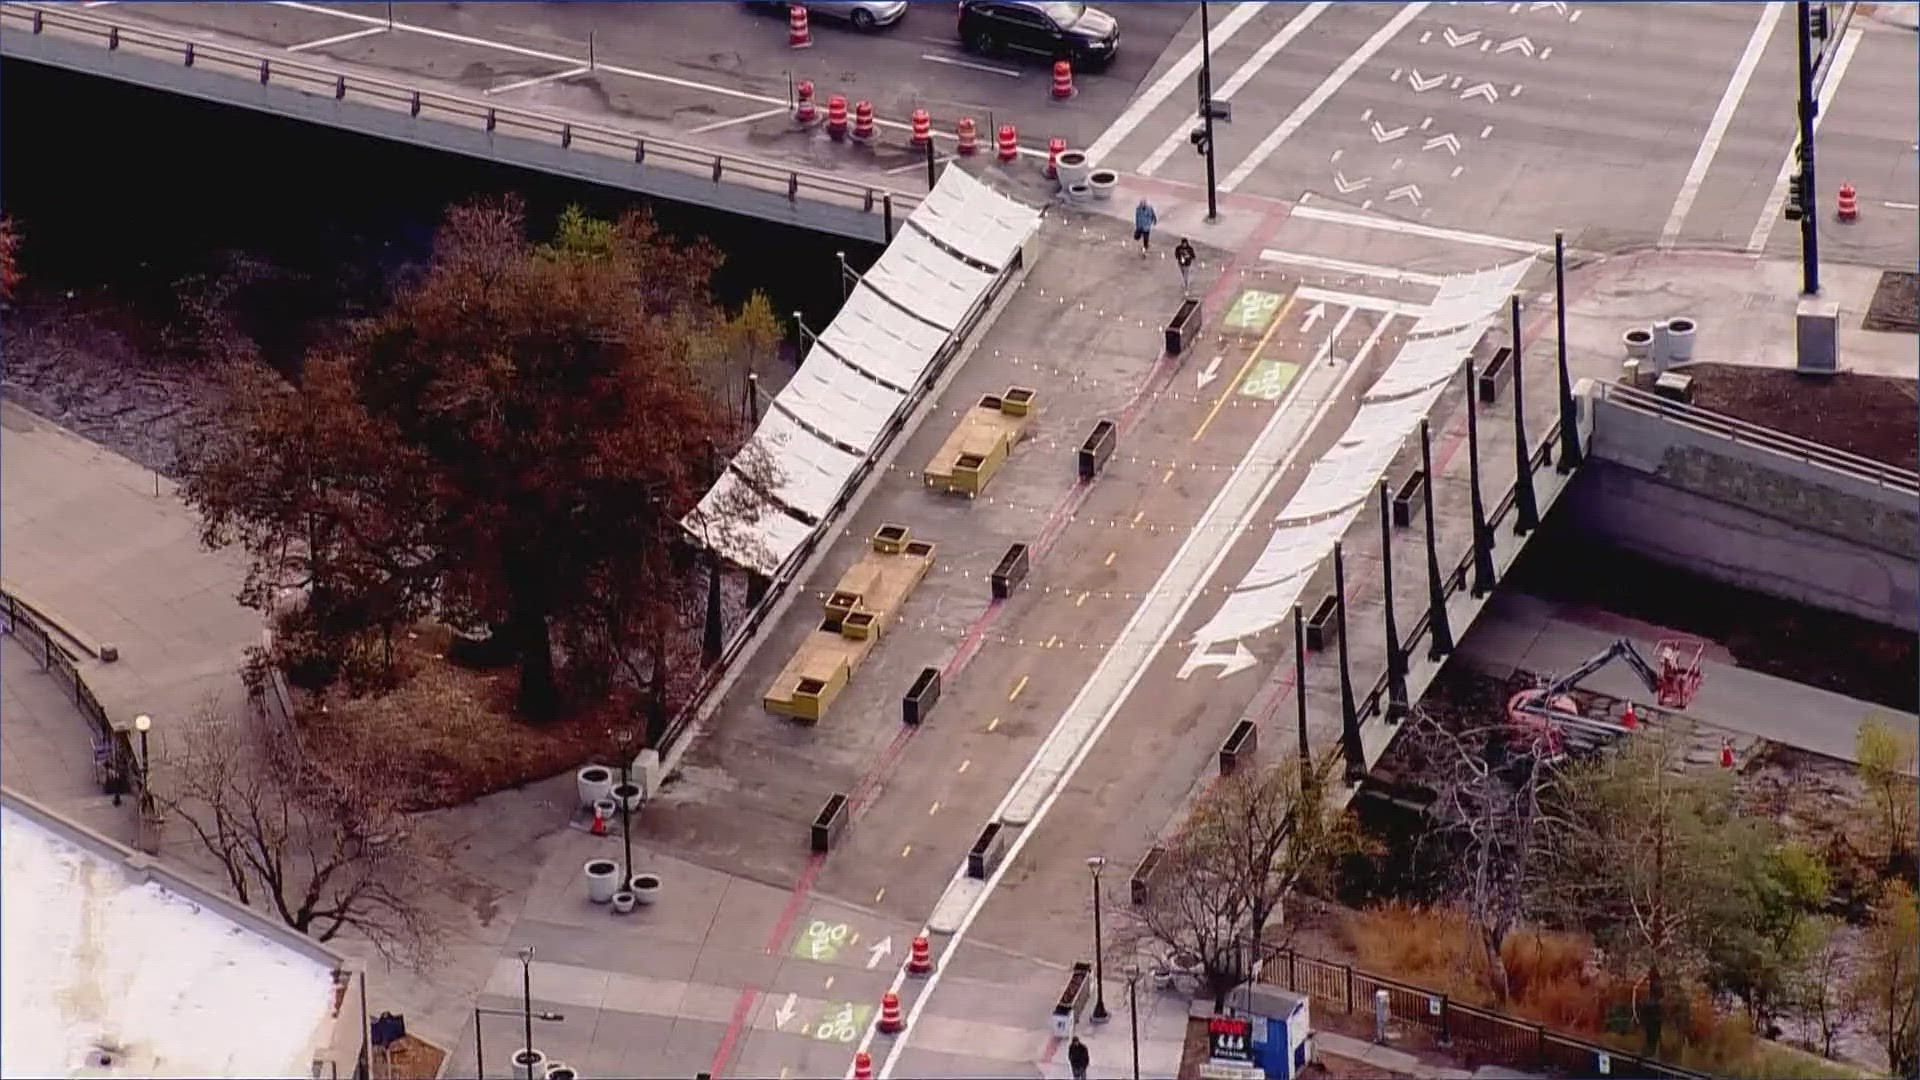 The new bridge is more pedestrian and cyclist-friendly, according to the city.